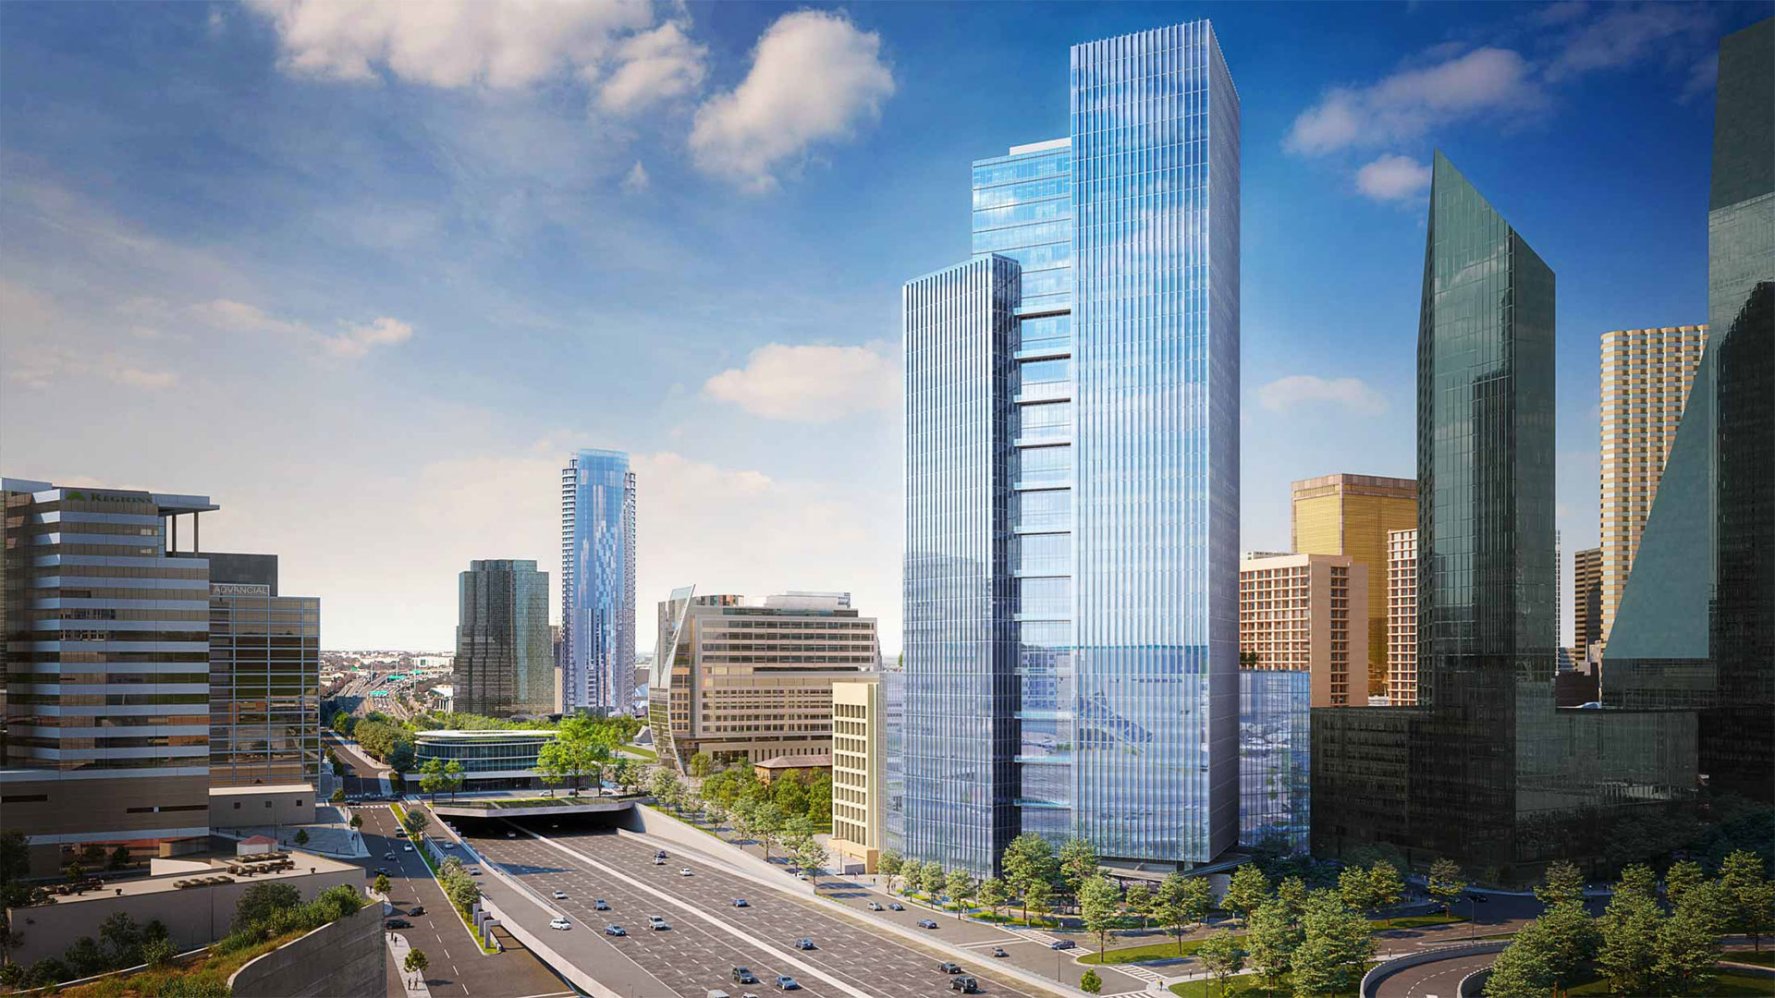 Field Tower Rendering Dallas 2021 ?quality=85&strip=all&fit=1920%2C1080&w=1775&h=998&crop=1